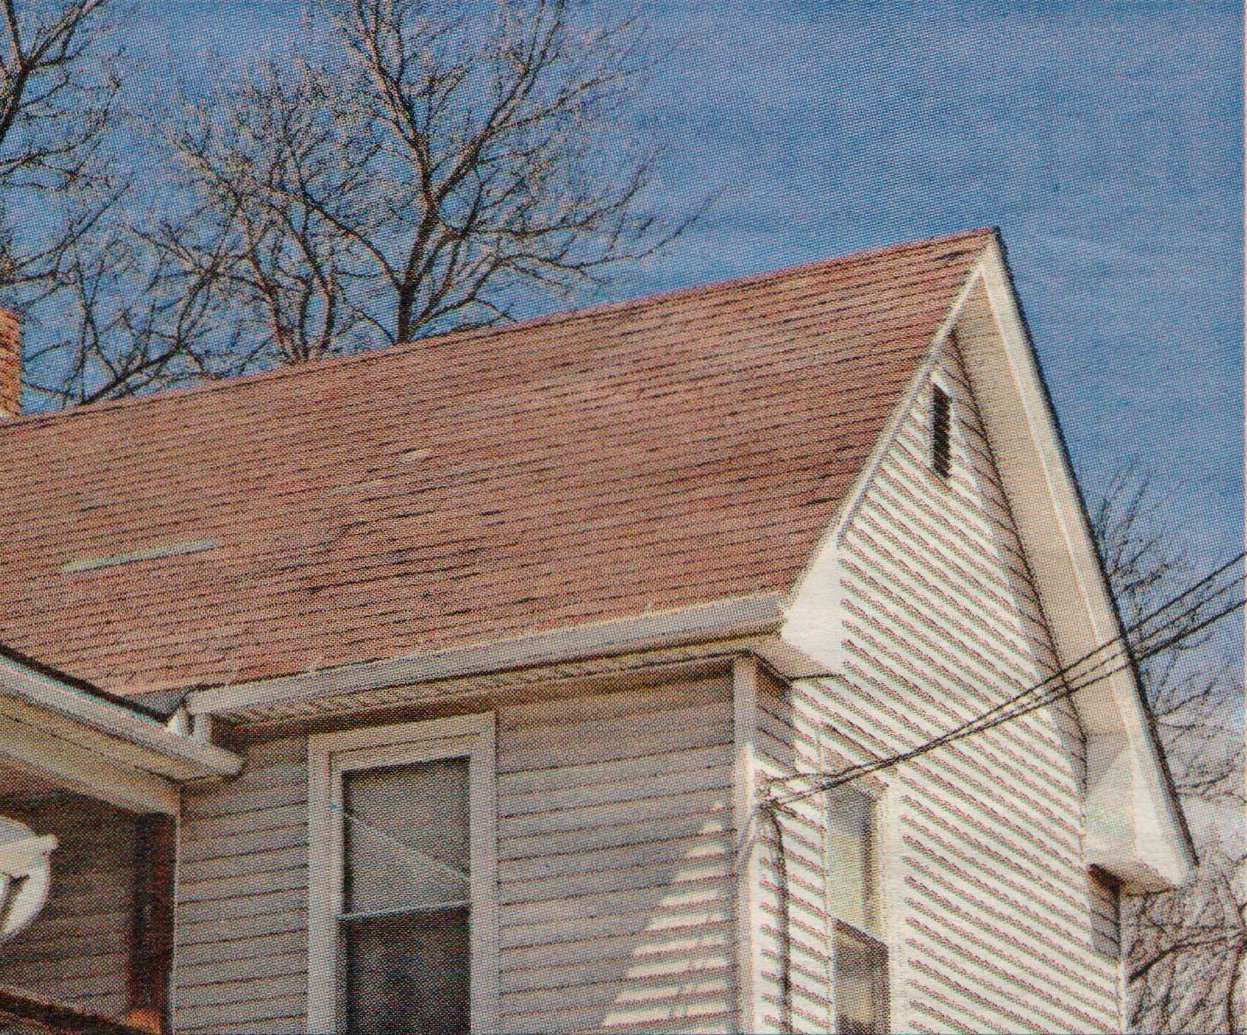 An older roof showing signs of age